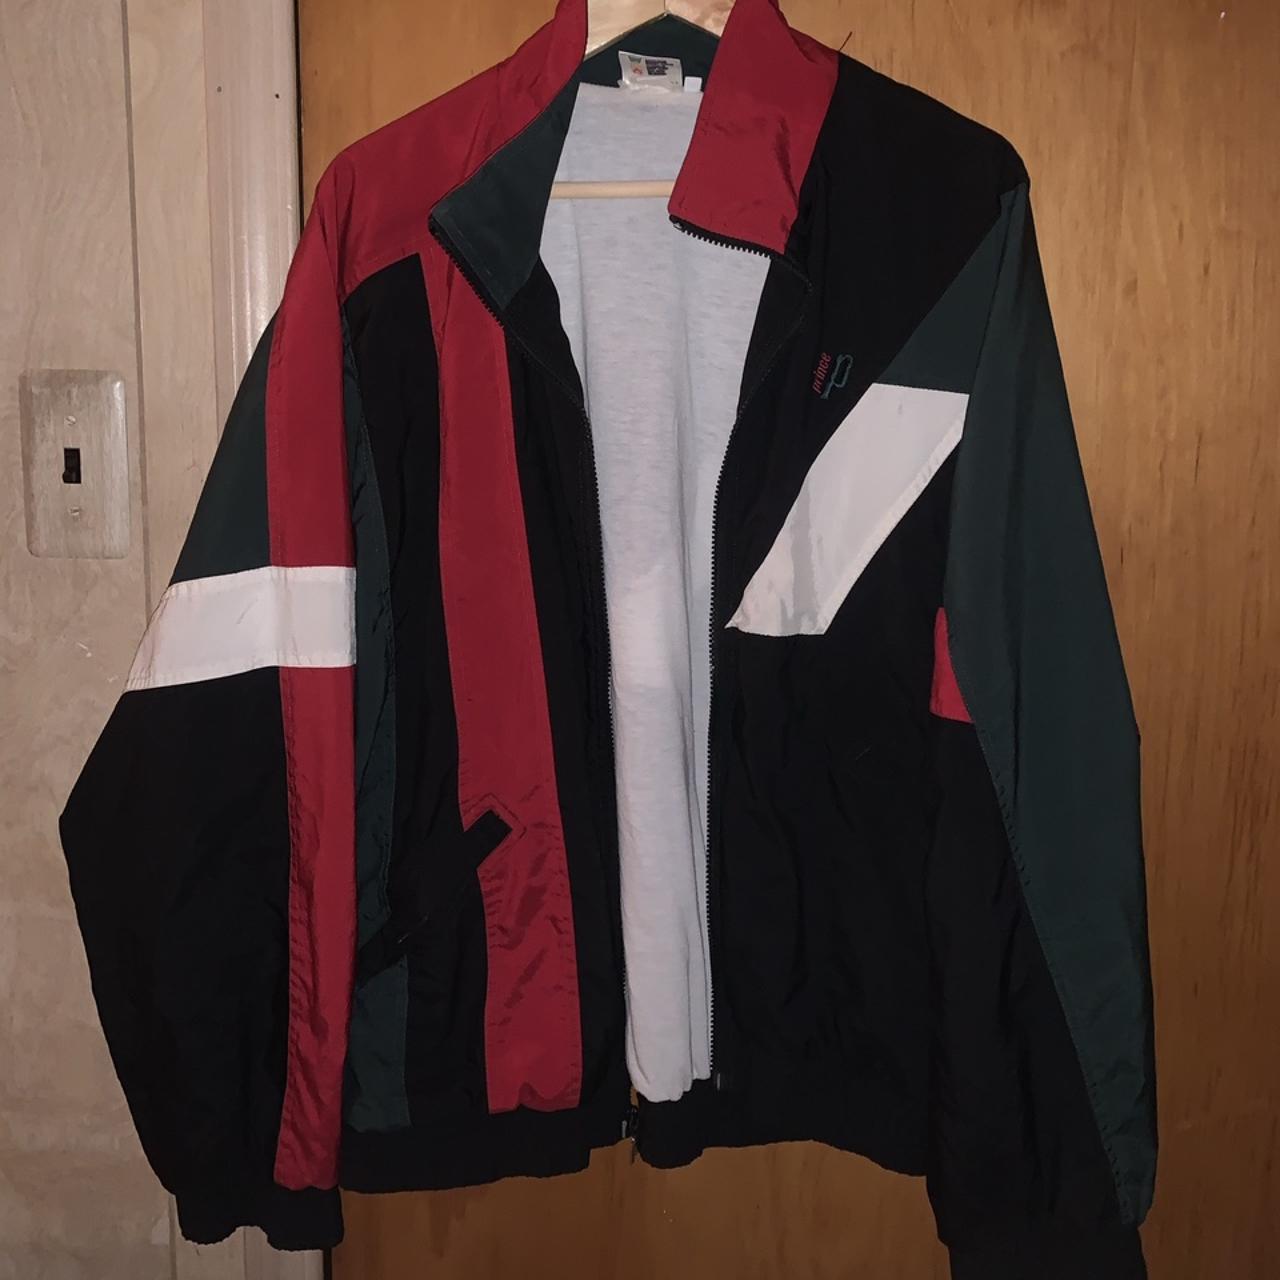 Prince Men's Red and Black Jacket